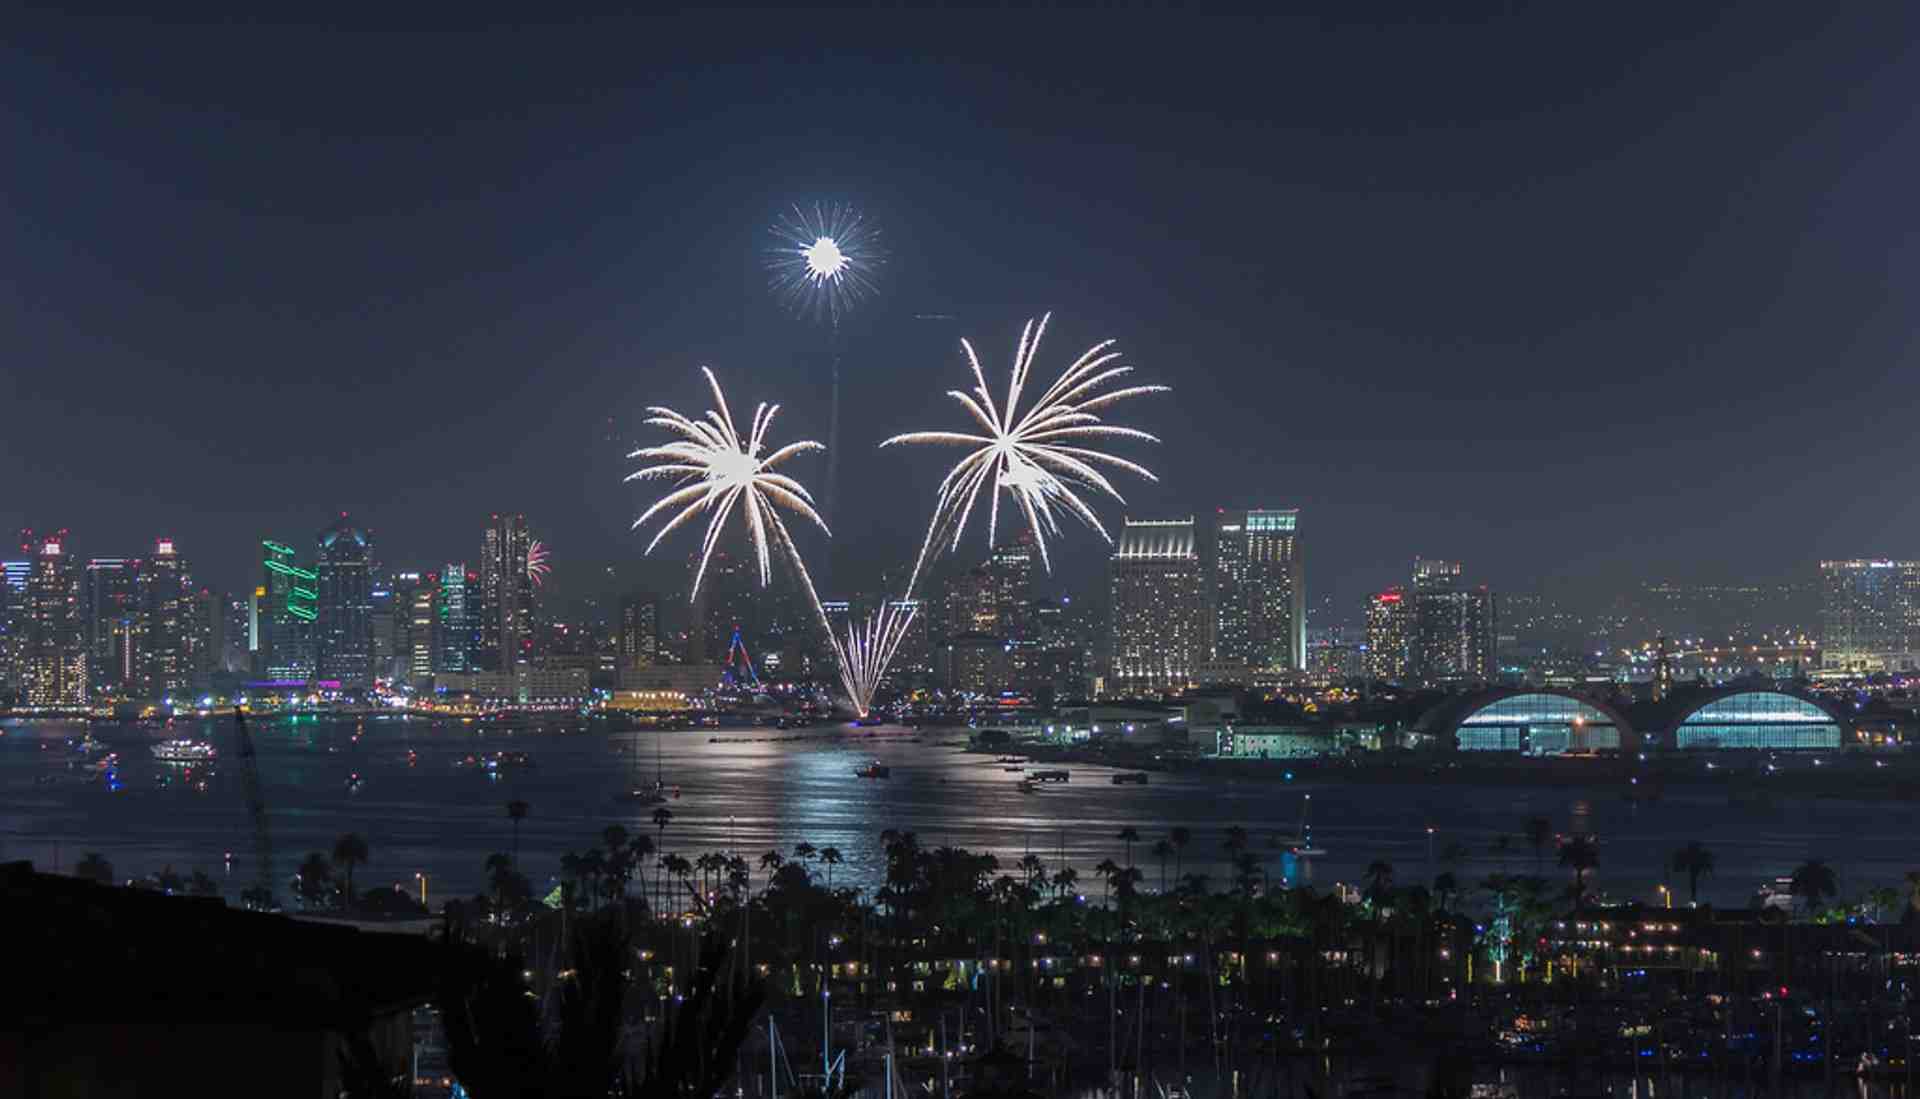 Where are the fireworks in Chula Vista?